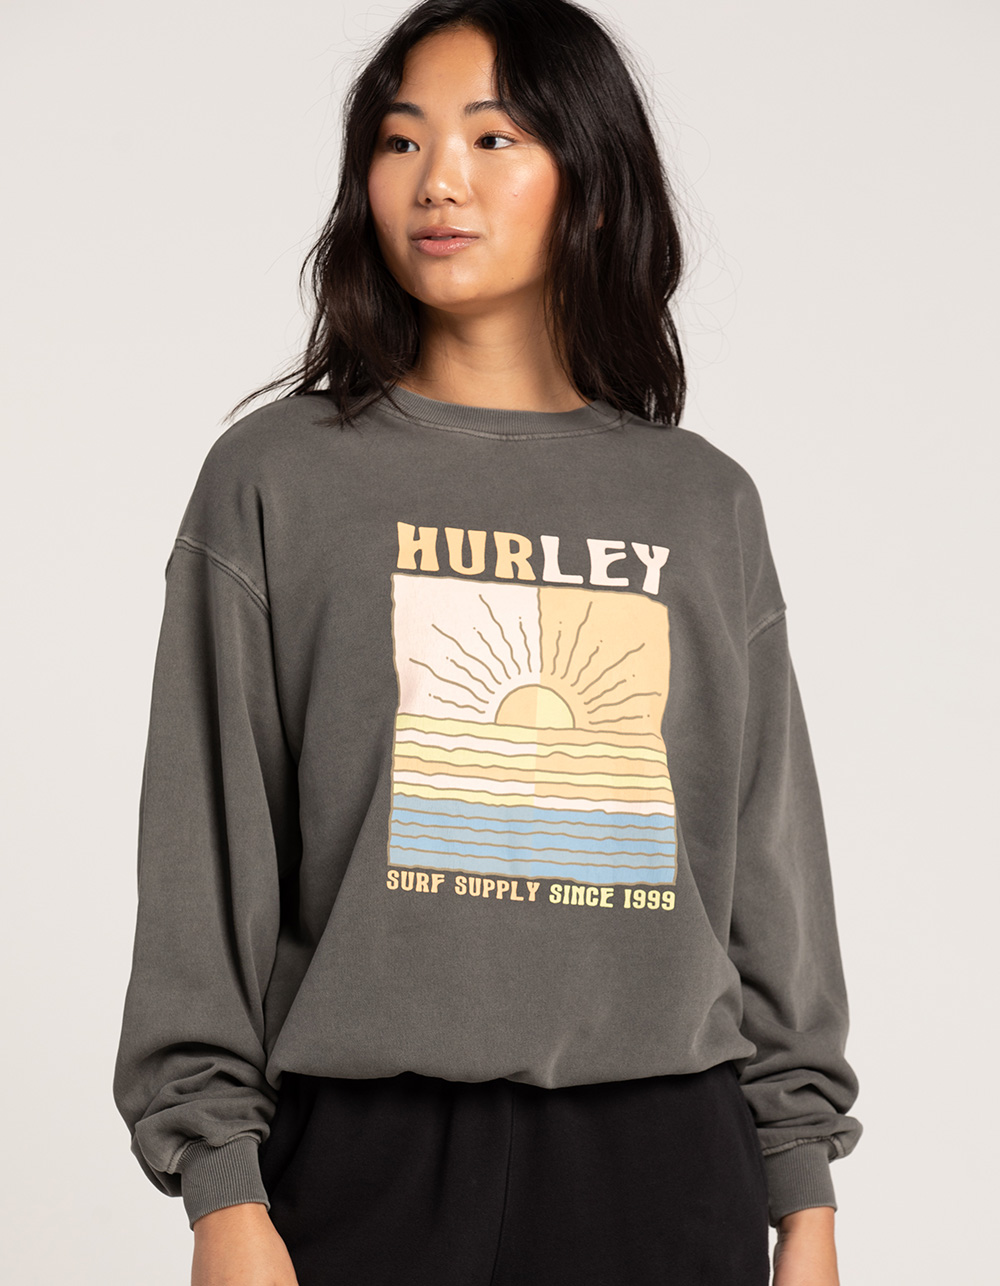 Taalkunde condensor wimper Hurley: Clothing For Women | Tillys